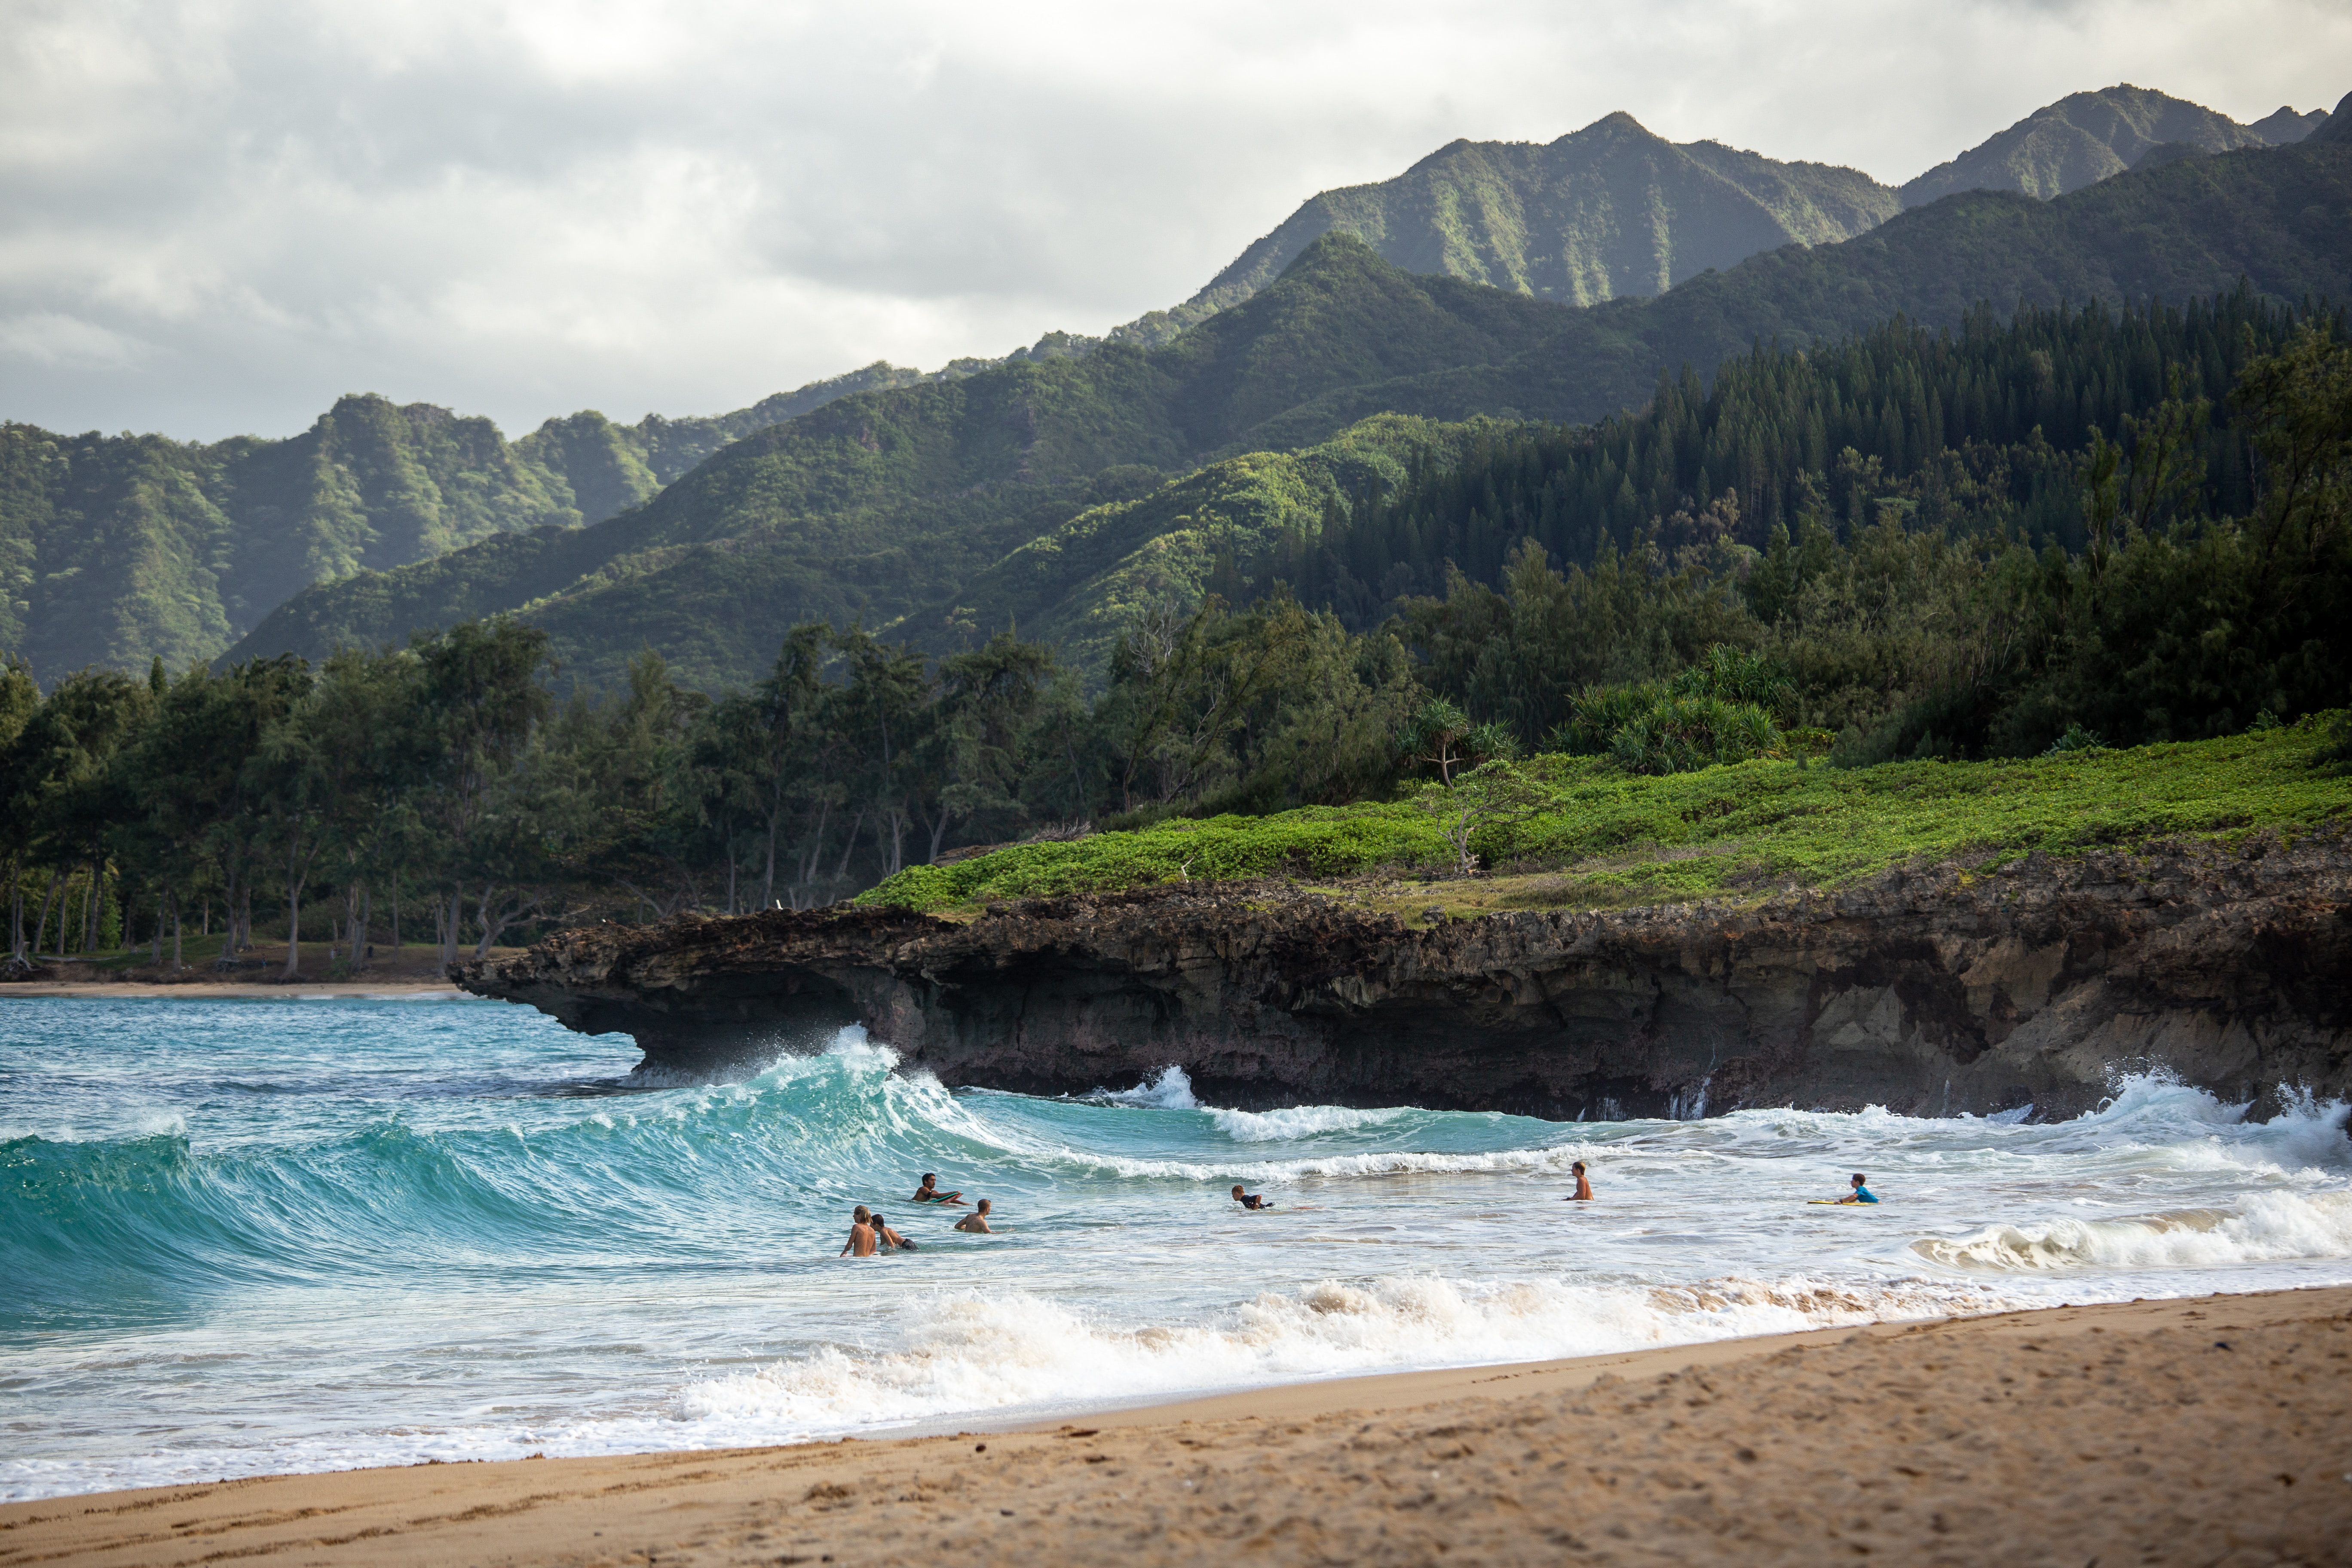 10 Uncommon and Valuable Tips for Planning your Hawai’i Trip